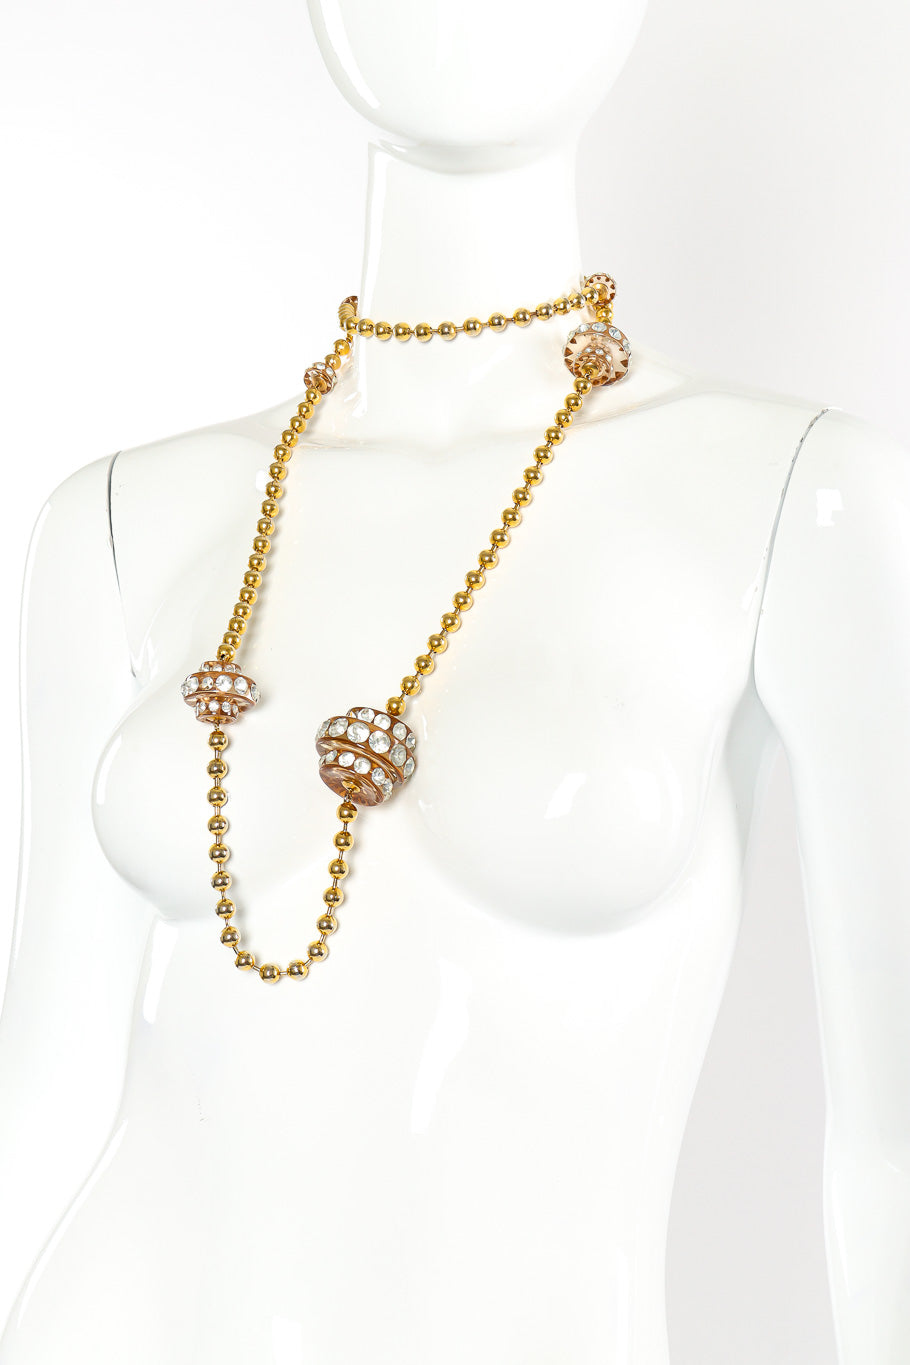 Vintage lucite disc necklace on white background looped around mannequin neck twice @recessla